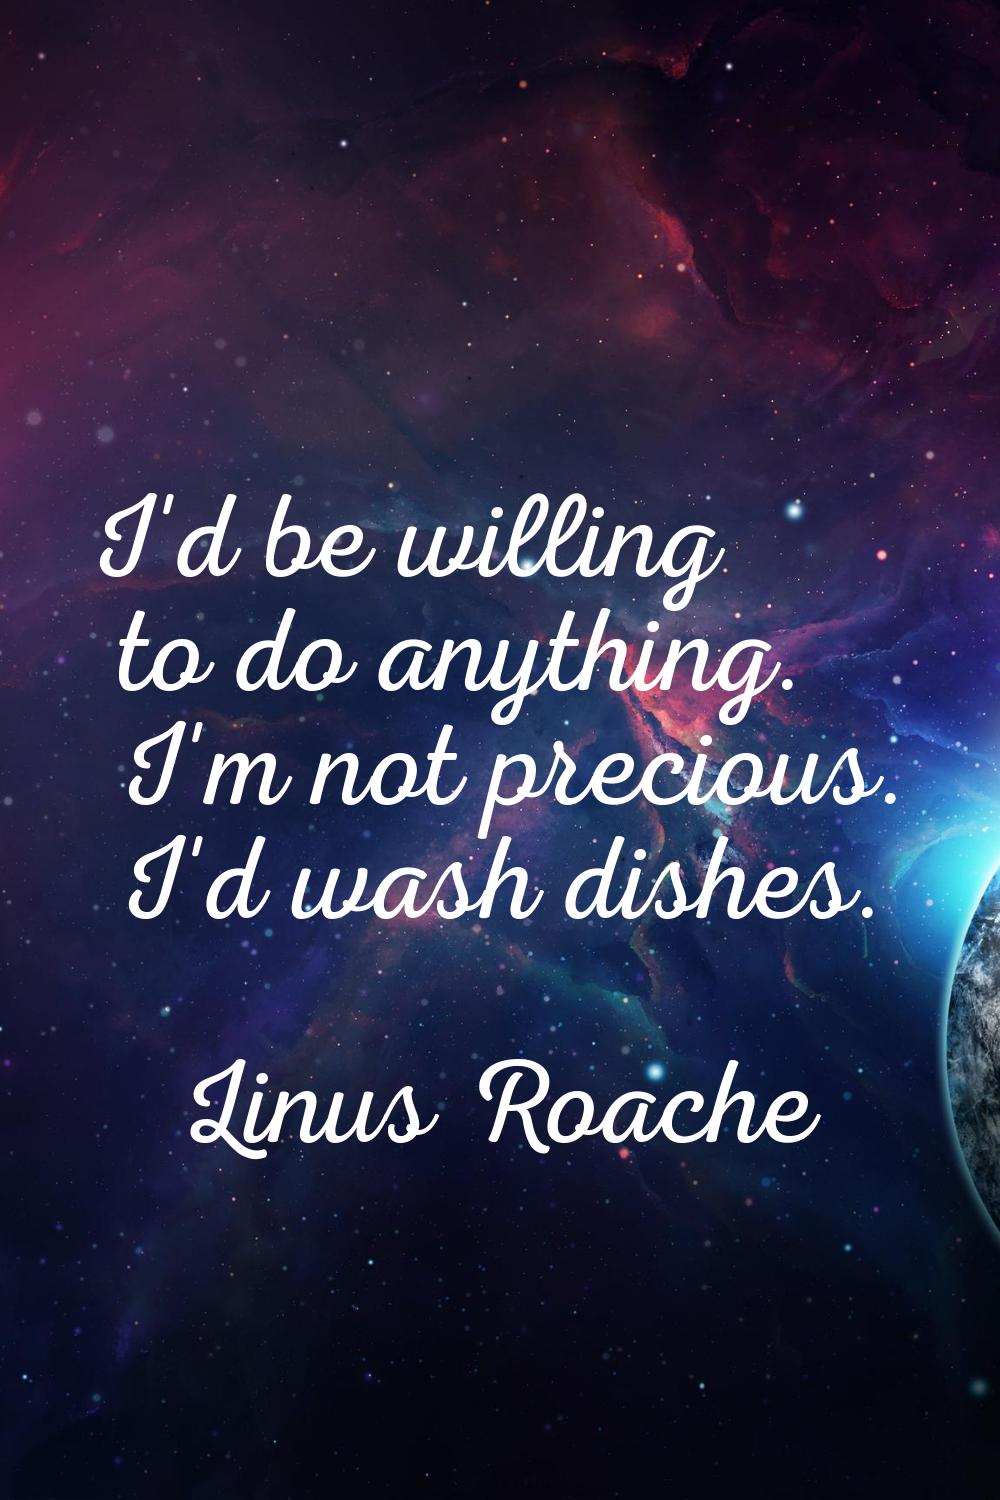 I'd be willing to do anything. I'm not precious. I'd wash dishes.